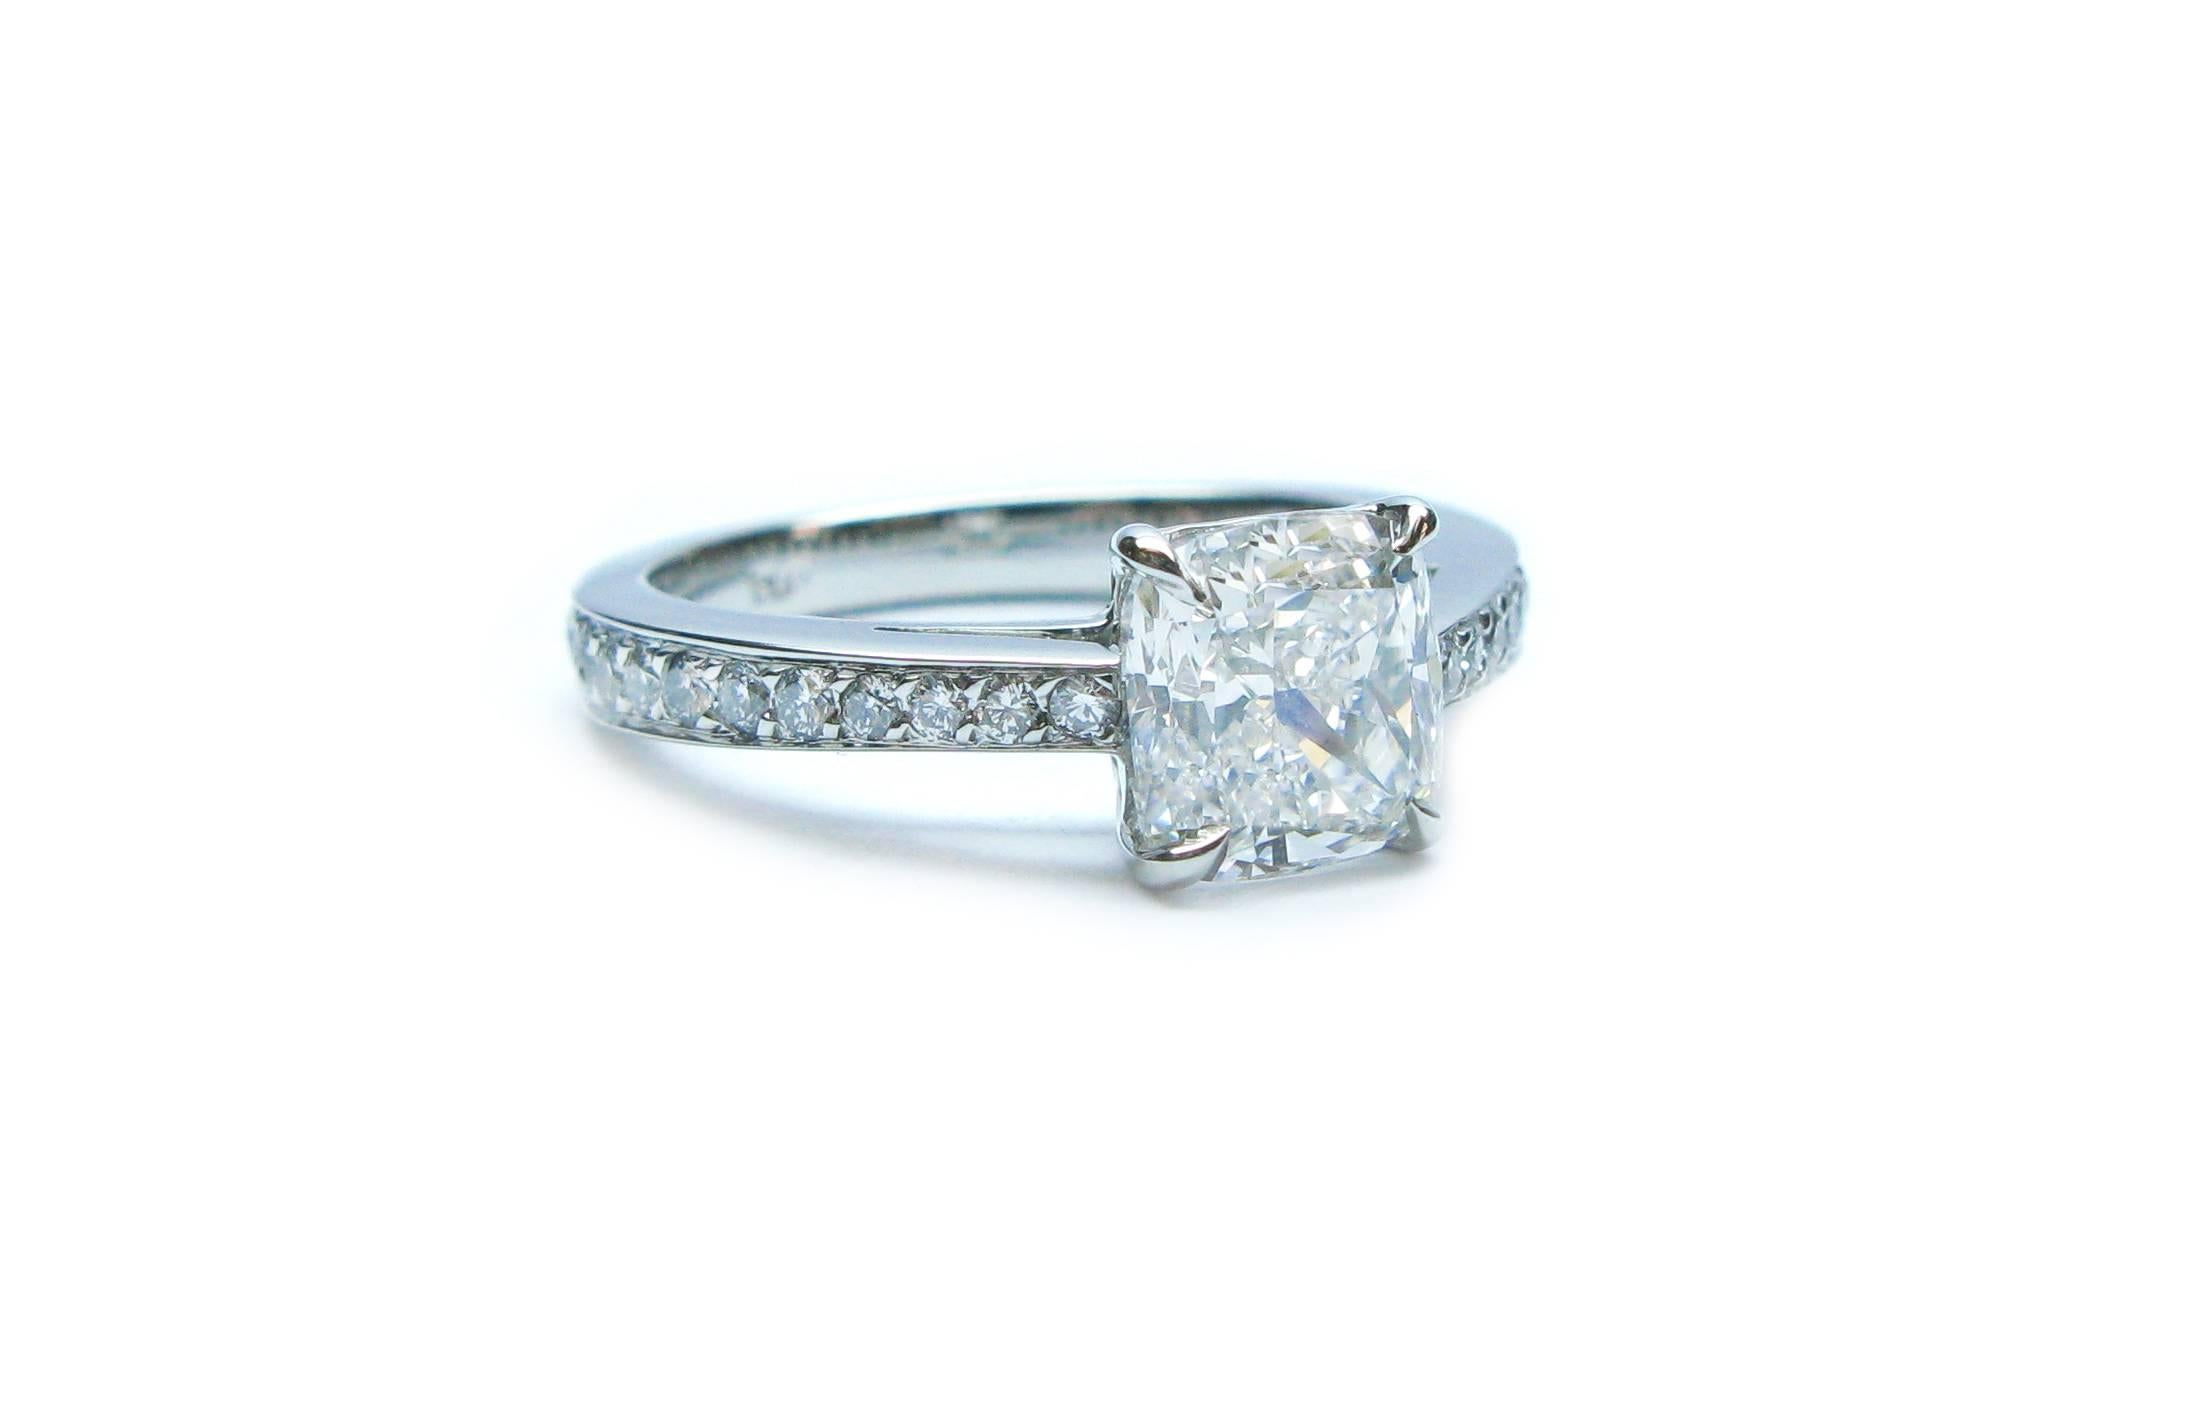 This charming handmade platinum engagement ring features a GIA certified 1.81ct, F color, VS1 clarity, cushion diamond center stone with 0.45ctw of pave set round brilliant diamonds down the band. This lovely engagement ring will be the perfect